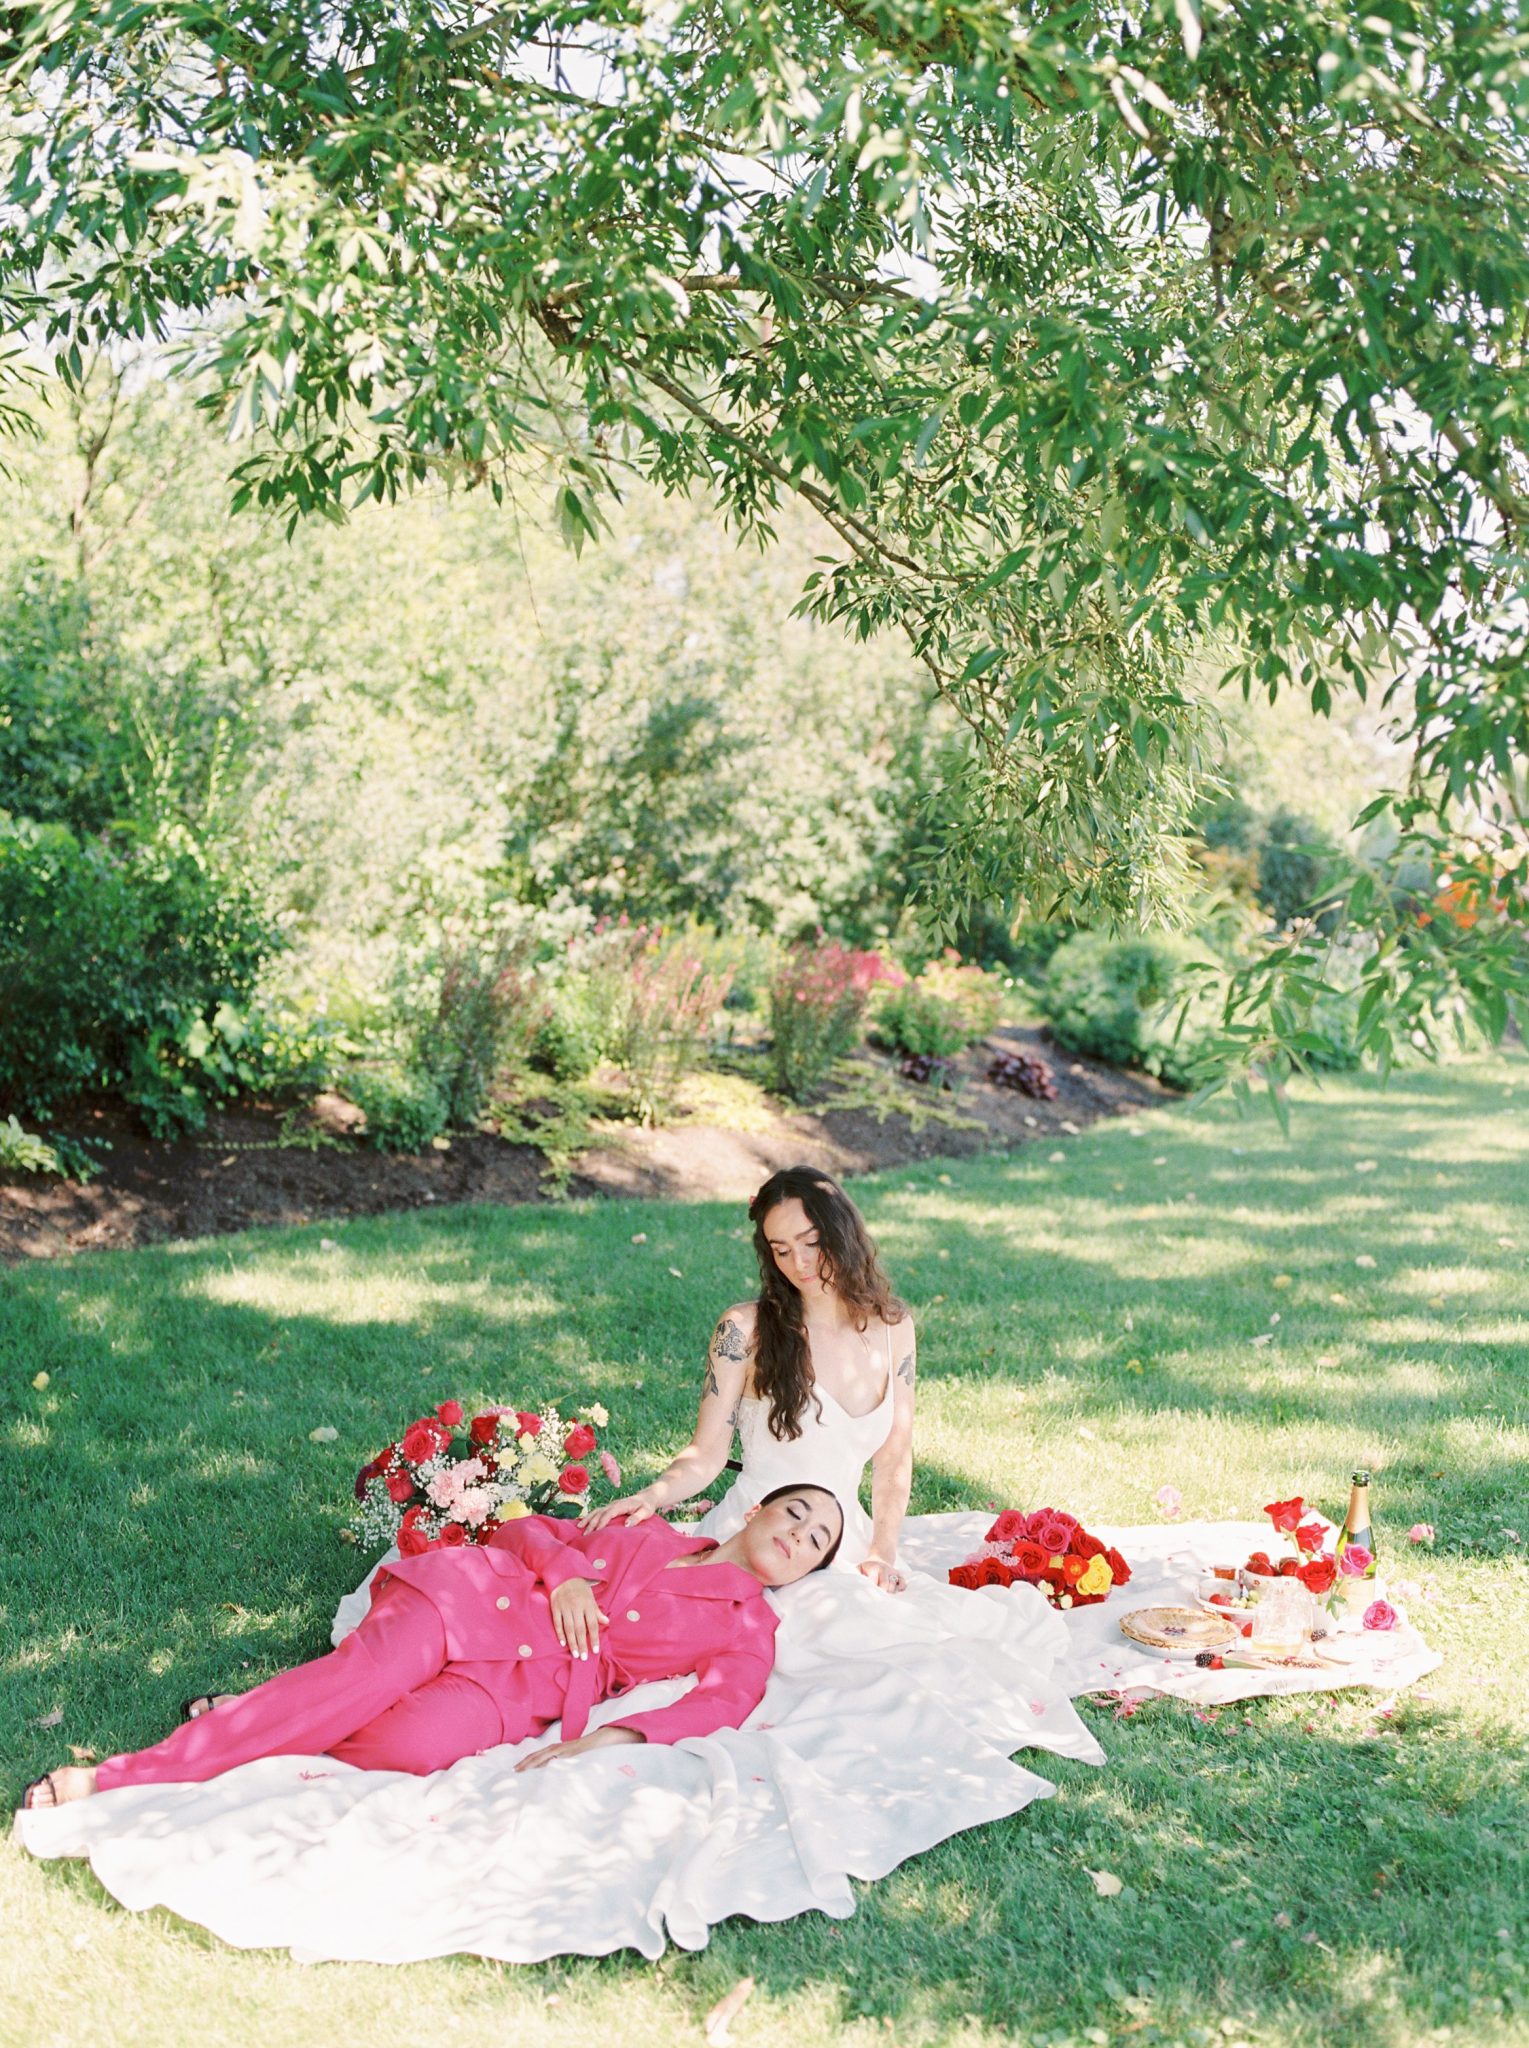 Valentine's Day Inspiration, hot pink suit, picnic in the park